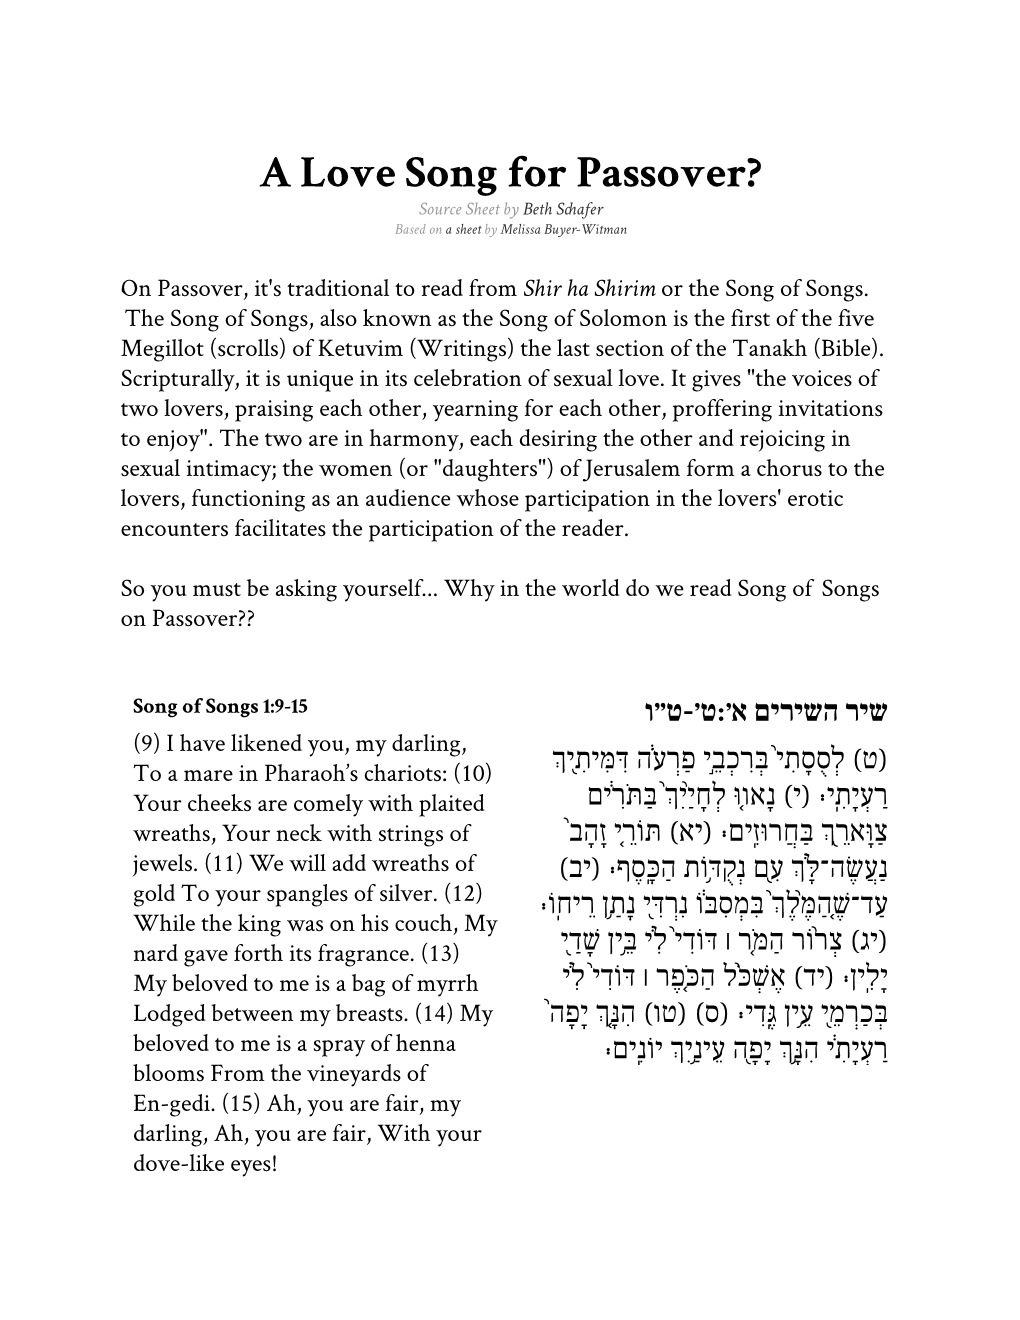 A Love Song for Passover? Source Sheet by Beth Schafer Based on a Sheet by Melissa Buyer-Witman